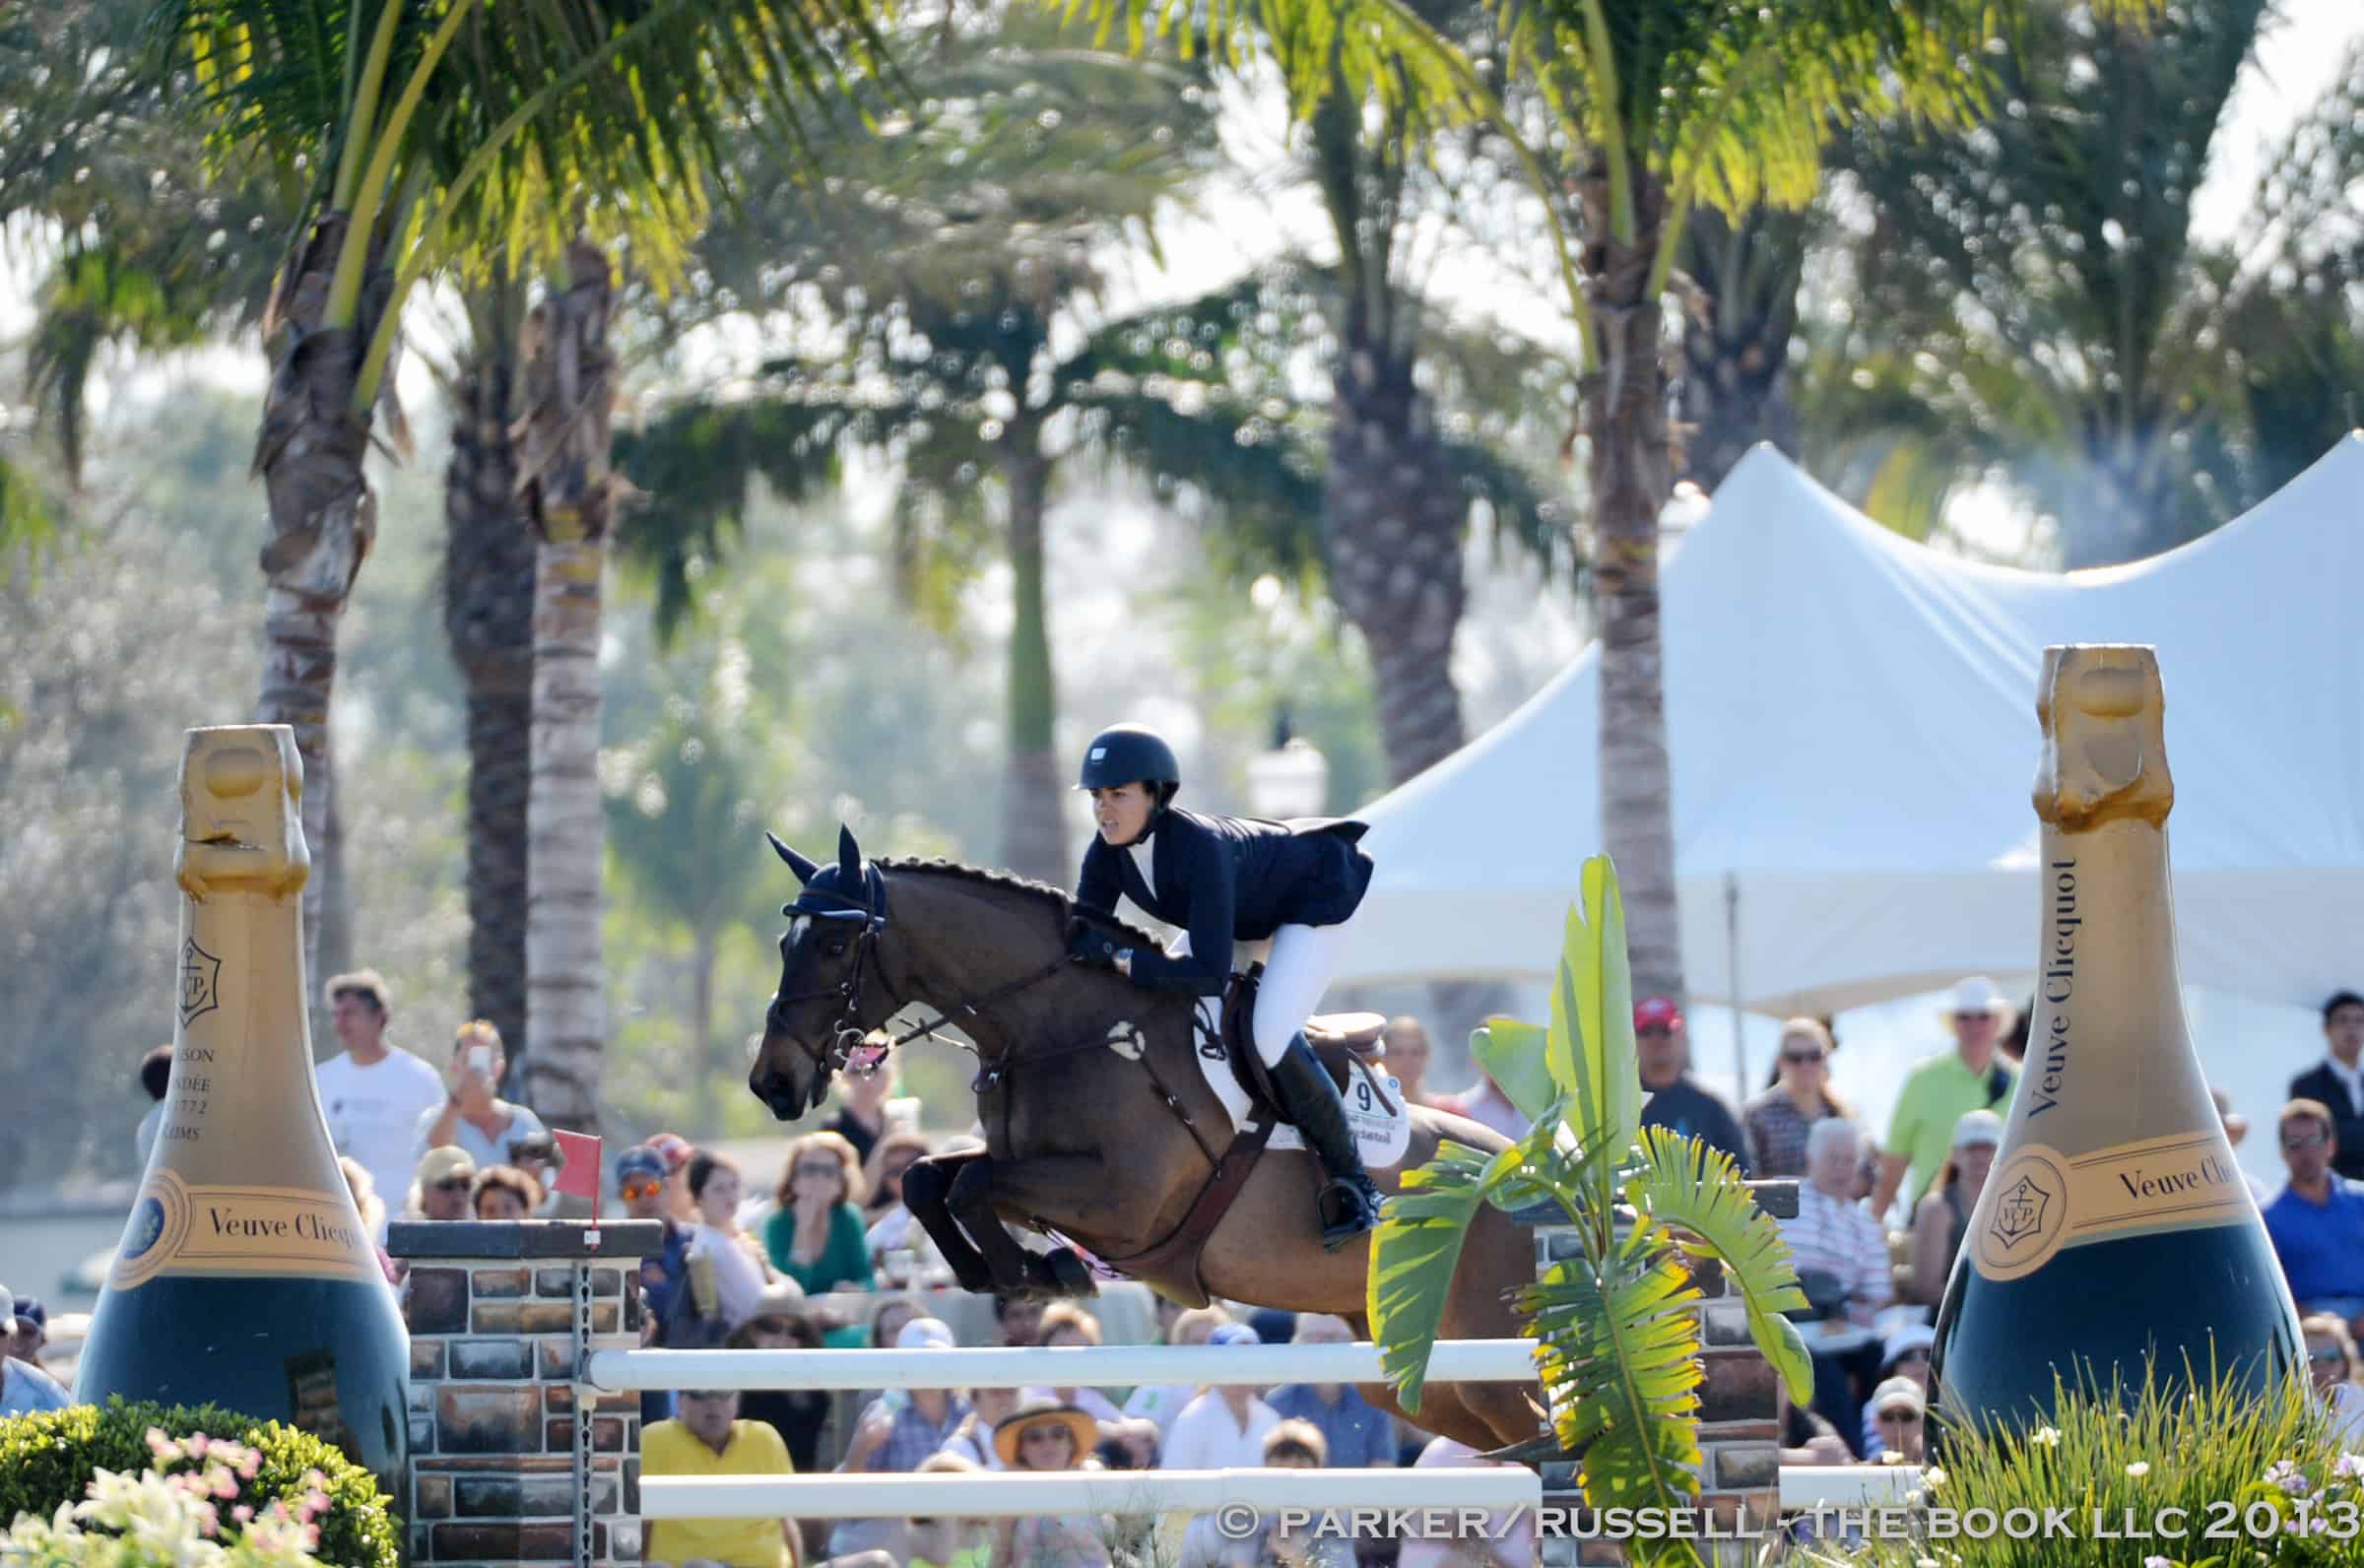 Q & A With World-Renowned Show Jumper Brianne Goutal